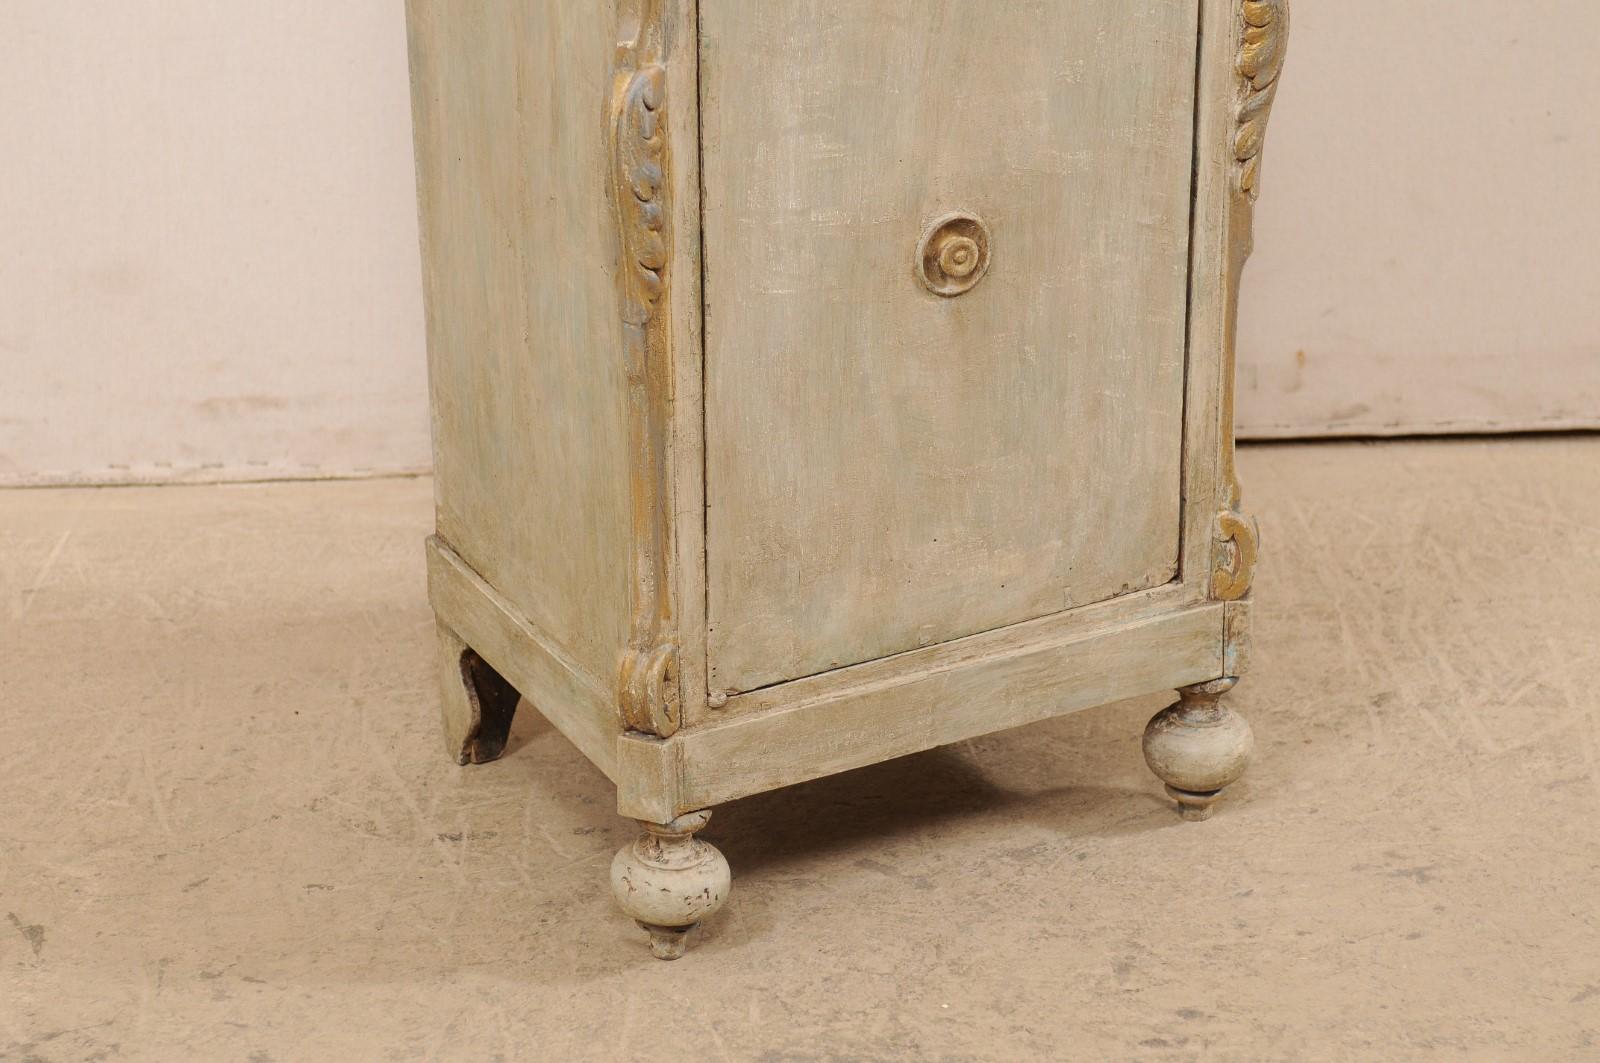 19th Century 19th C. European Painted Wood Cabinet, Cute Petite Size!  Light Blue/Grey w/Gold